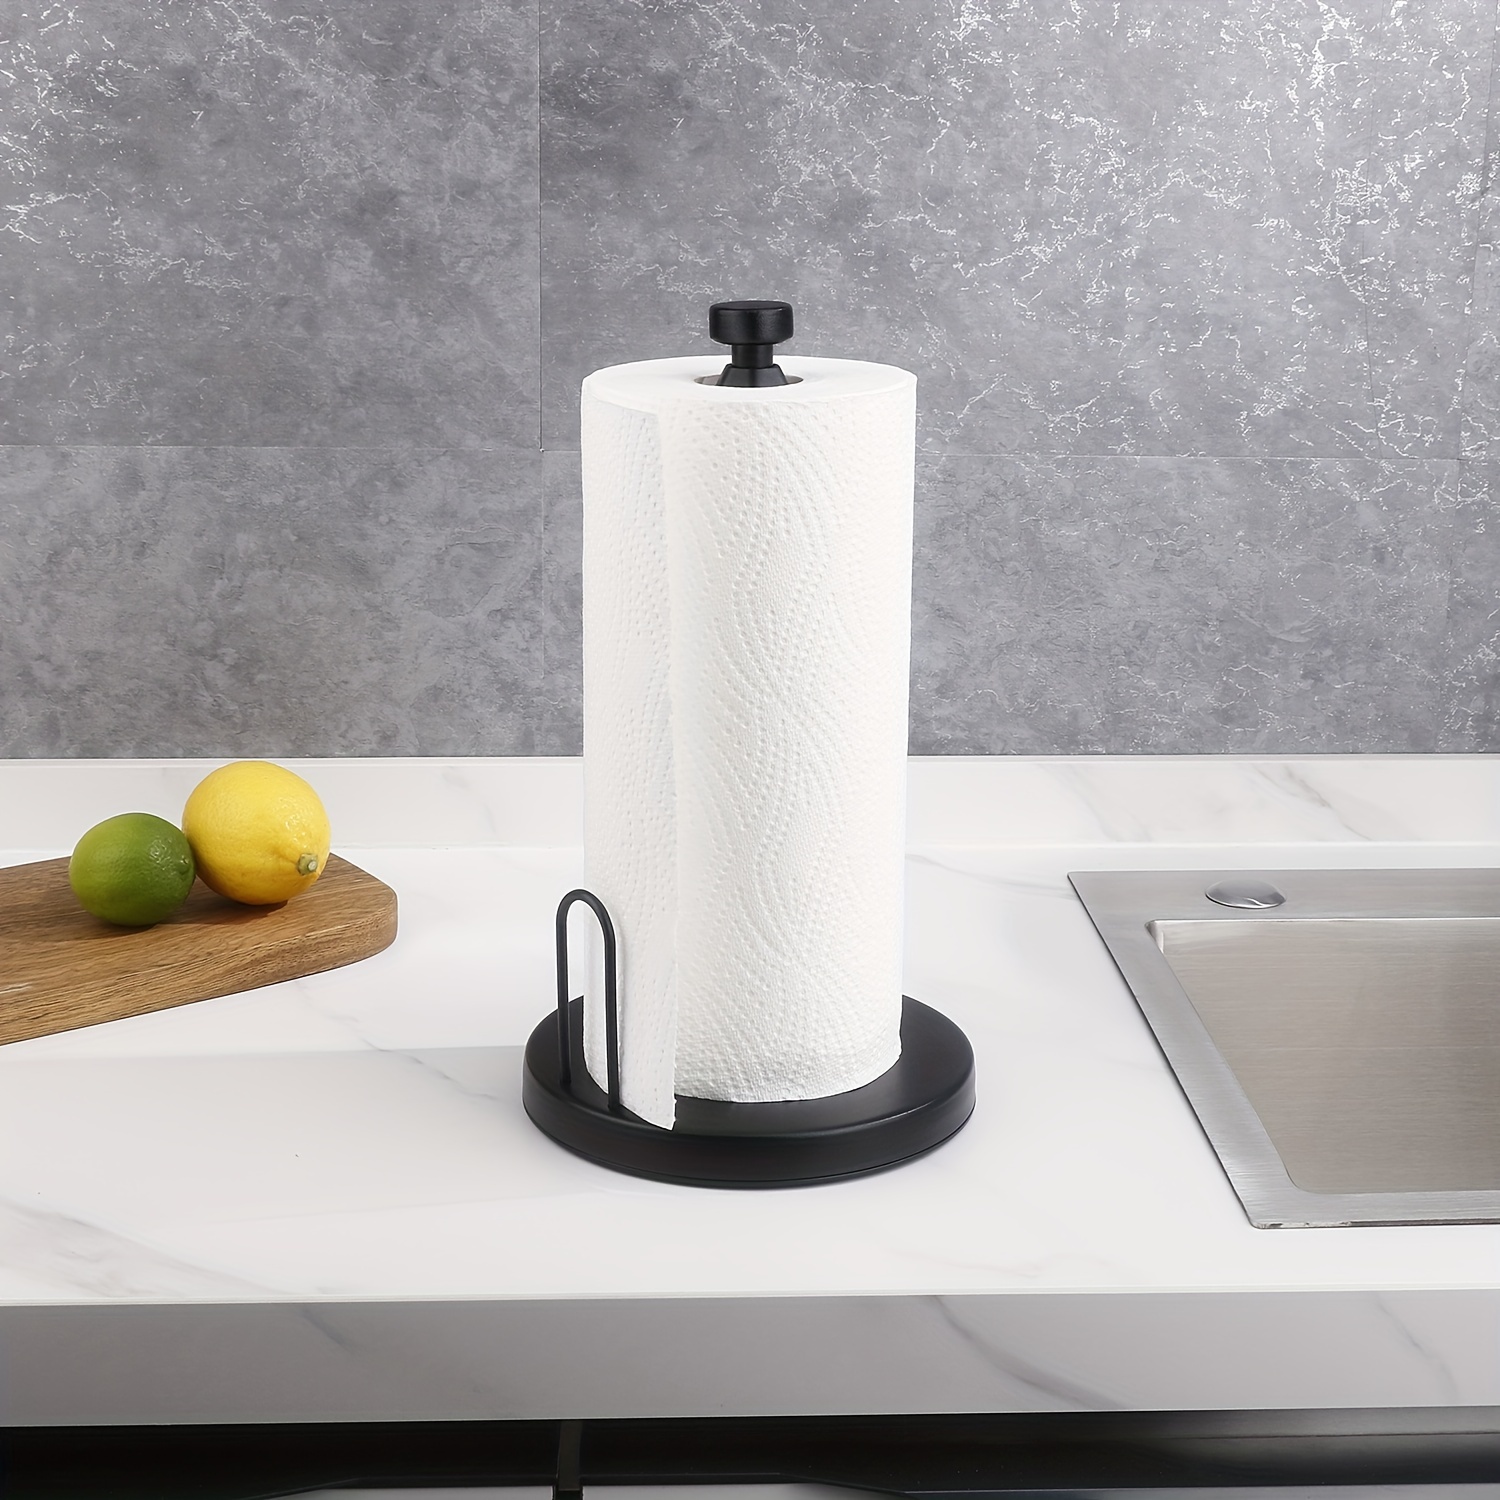 One-Handed Tear Paper Towel Stand Black With Ratchet System For